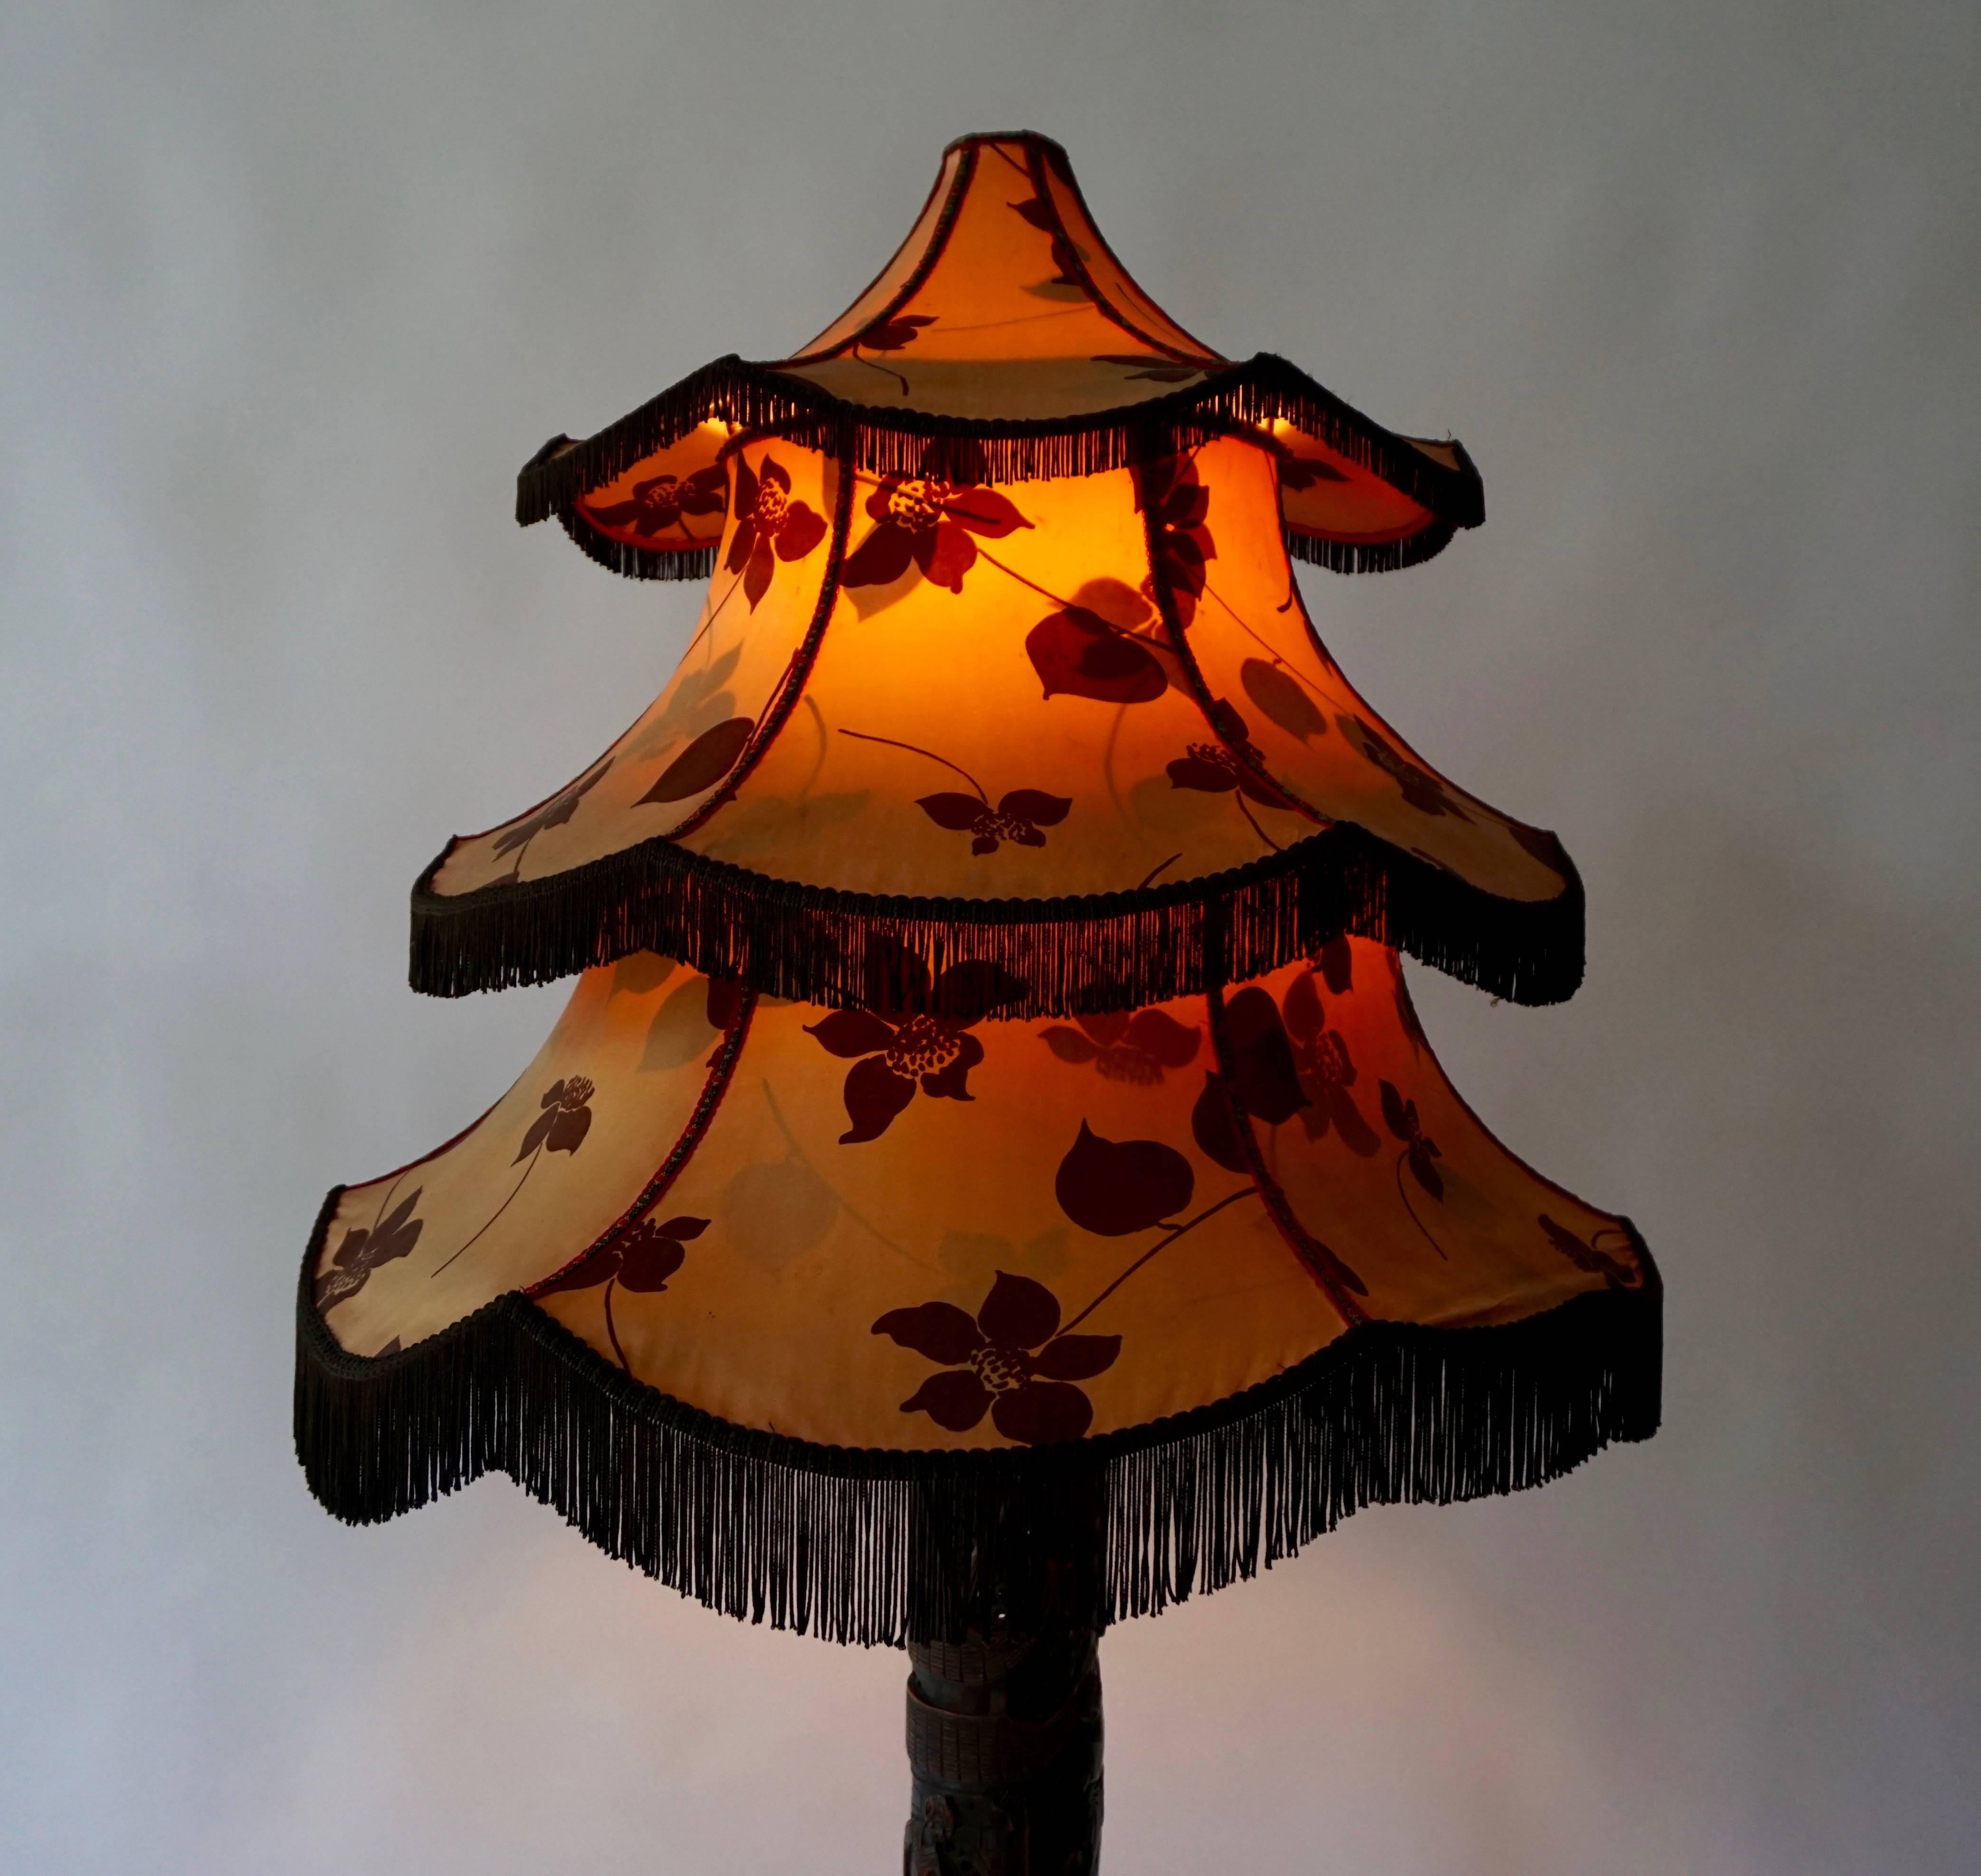 Chinese floor lamp.
For your consideration an antique floor lamp. Hand carved sculpture base in solid wood with a beautiful original pagoda shade decorated with flowers. China circa the 1920s. Wood in good shape. Nice details on the